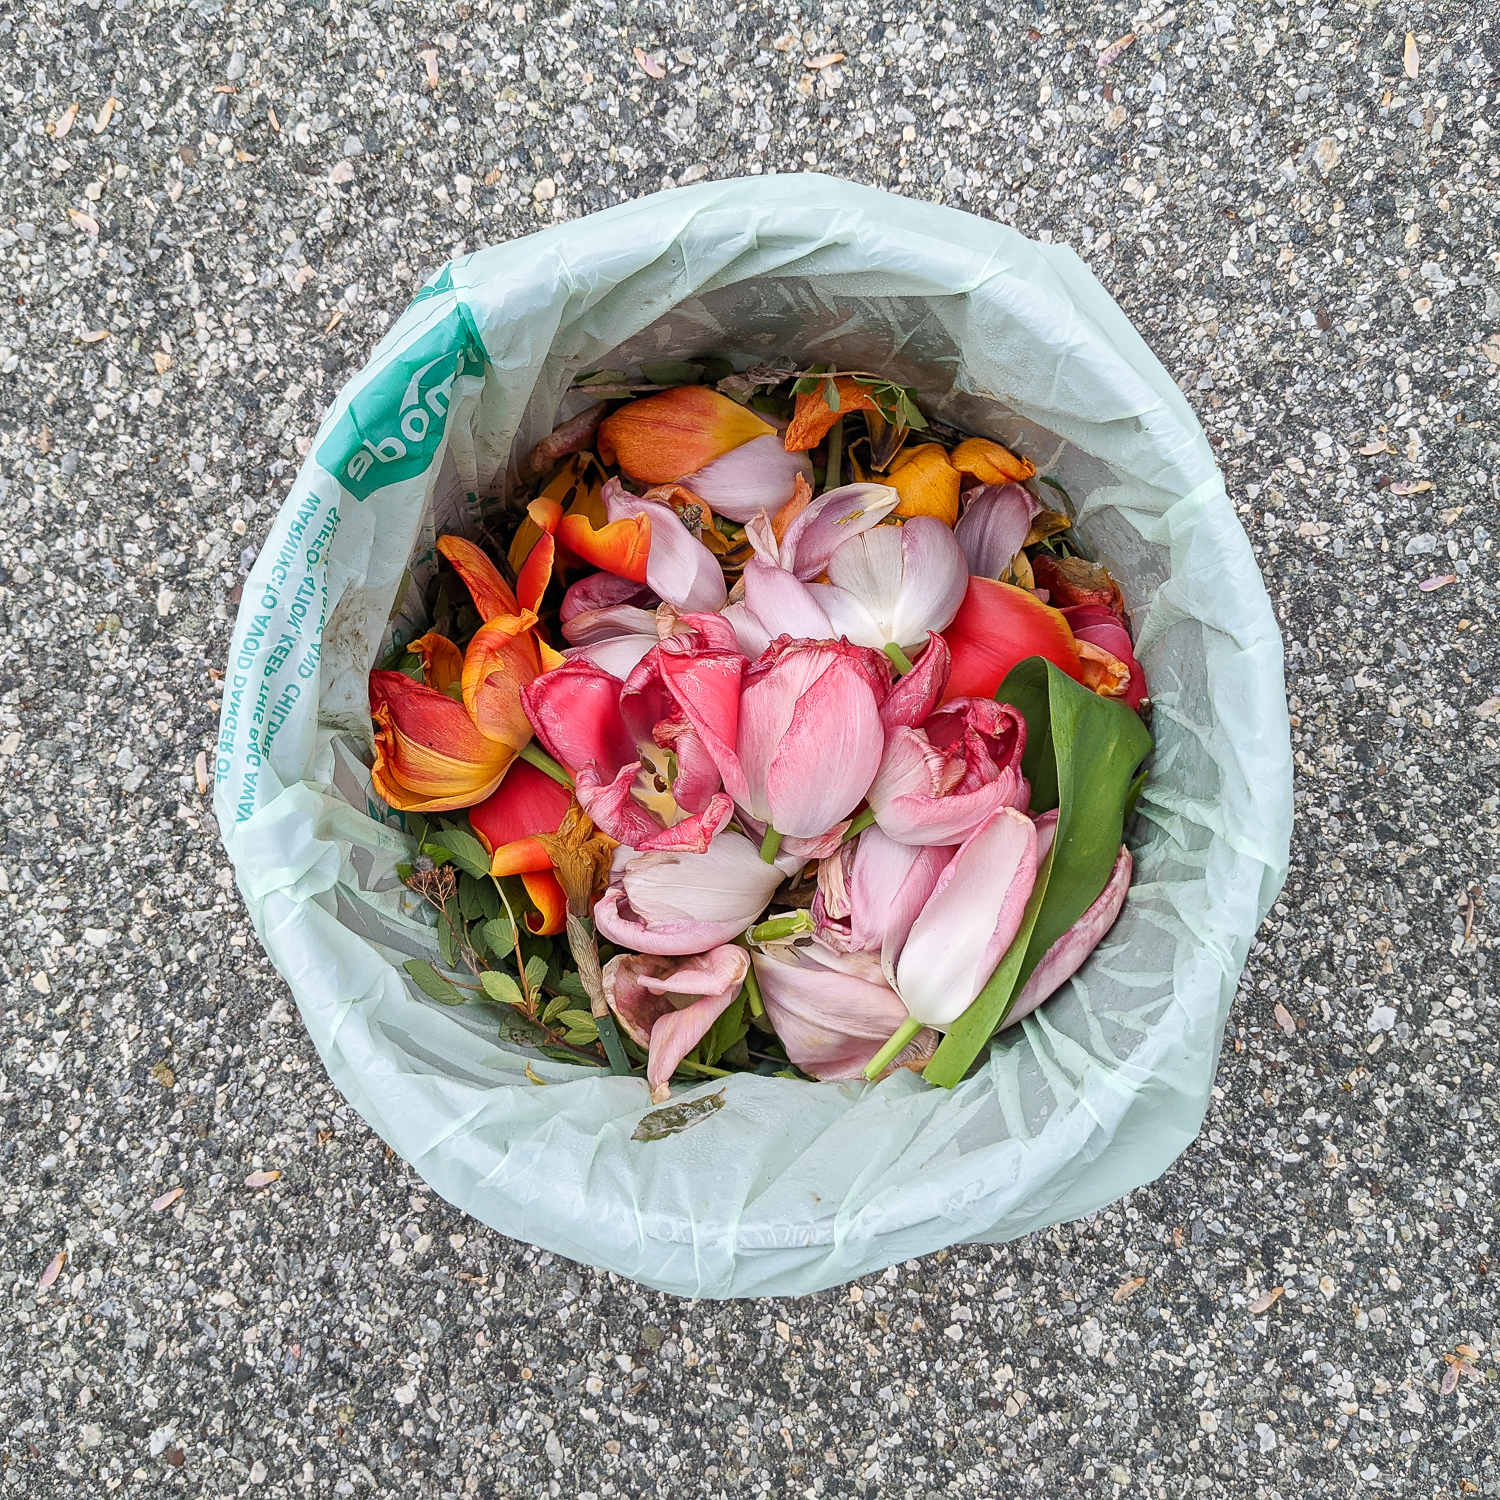 Can You Use A Curbside Composting Service If You Live in An Apartment?